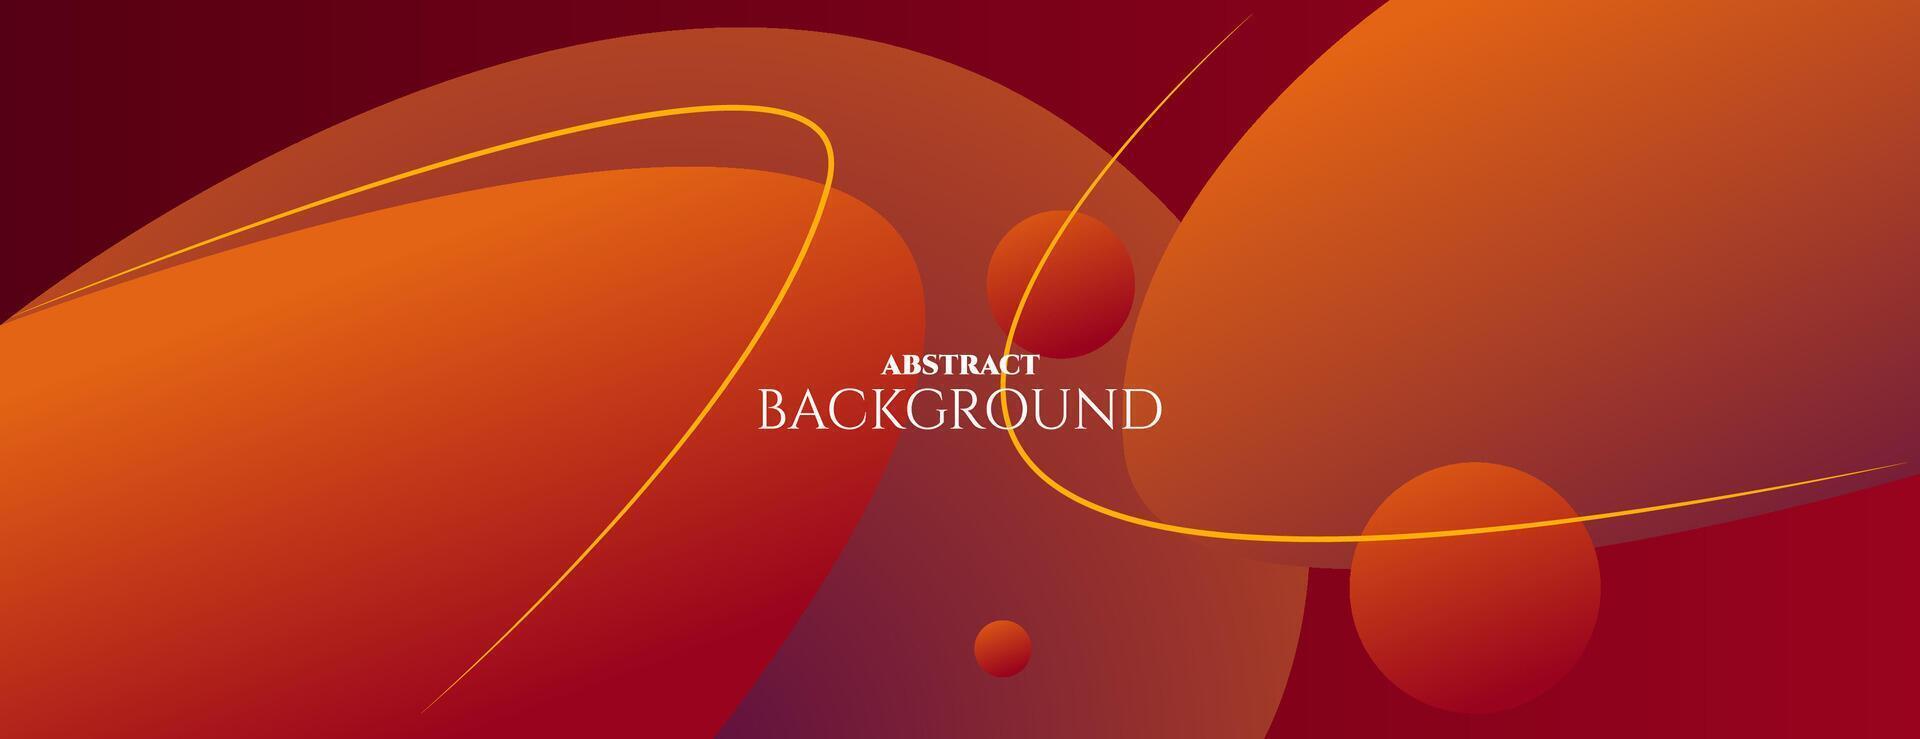 abstract orange and red fluid background with lines. vector illustration